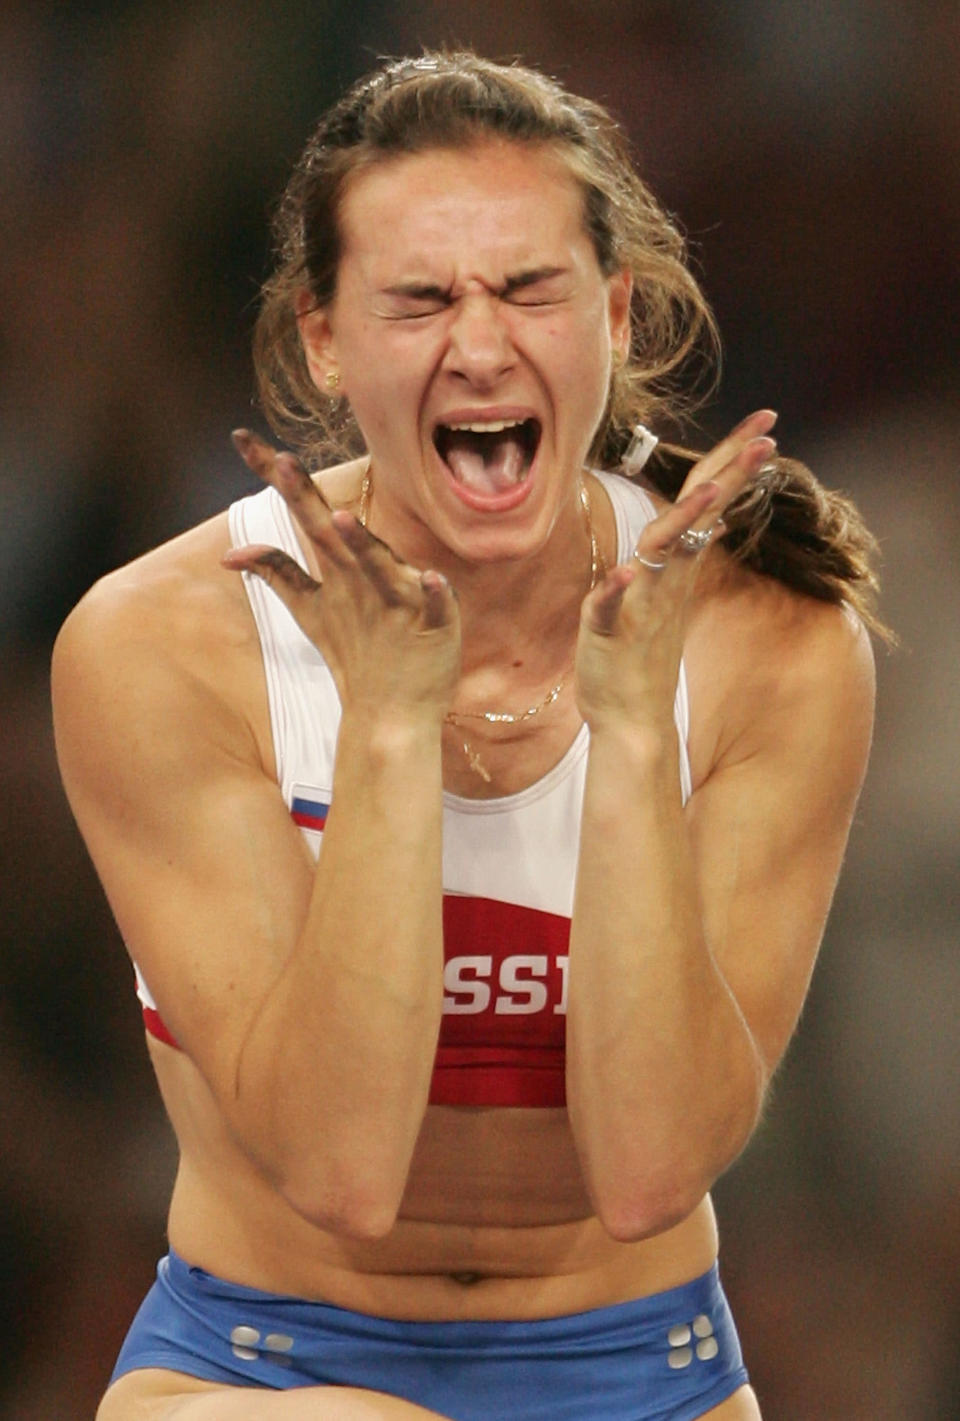 ATHENS - AUGUST 24: Yelena Isinbayeva of Russia celebrates after she completed a world record attempt in the women's pole vault final on August 24, 2004 during the Athens 2004 Summer Olympic Games at the Olympic Stadium in the Sports Complex in Athens, Greece. Isinbayeva of Russia broke the world record in the women's pole vault Tuesday with a vault of 16 feet, 1 1/4 inches (4.91 meters). (Photo by Mark Dadswell/Getty Images)